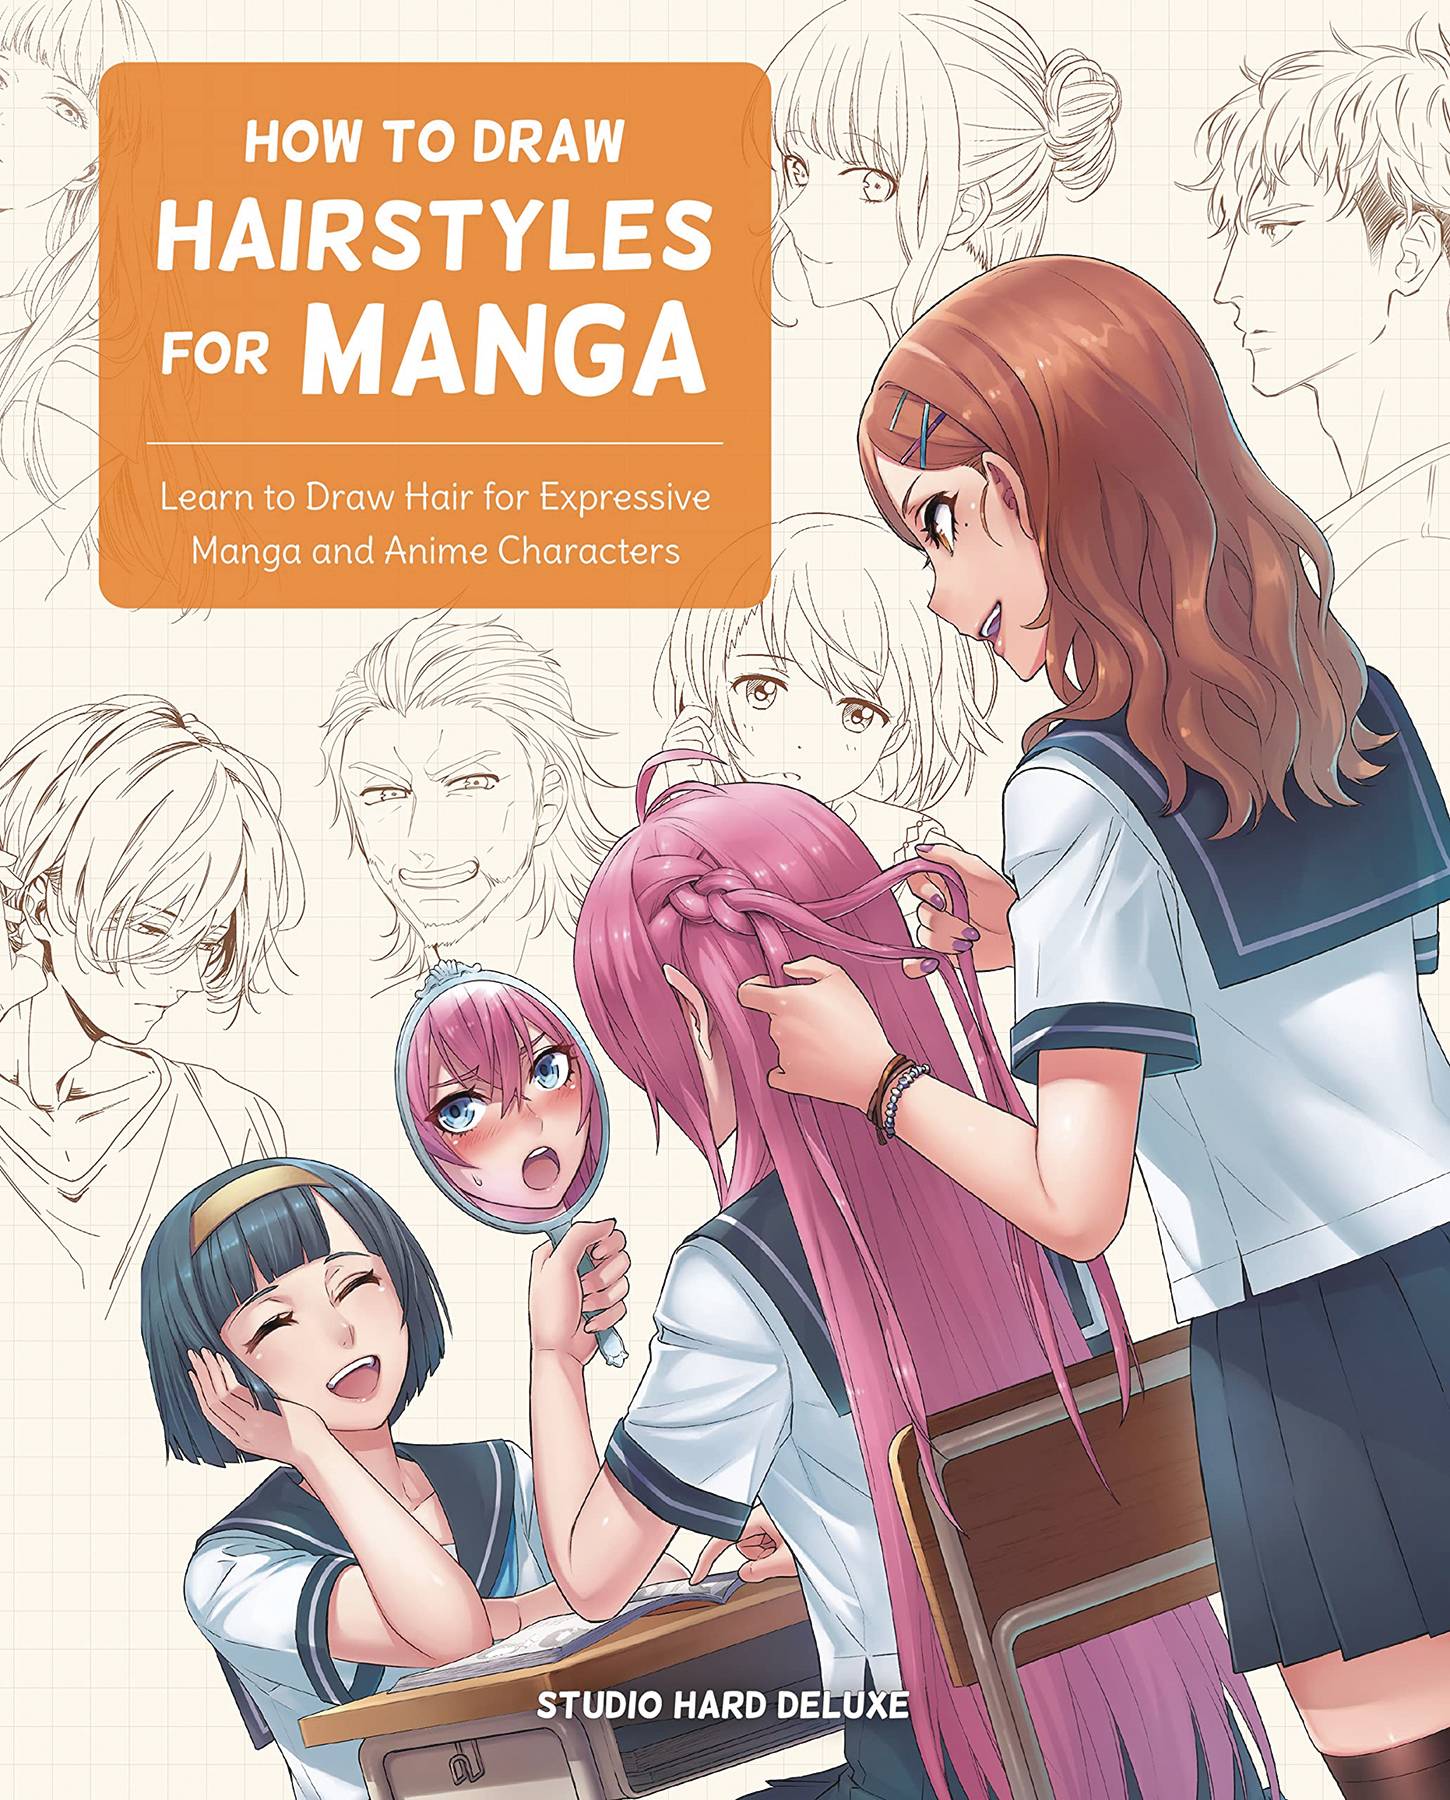 HOW TO DRAW HAIRSTYLES FOR MANGA SC